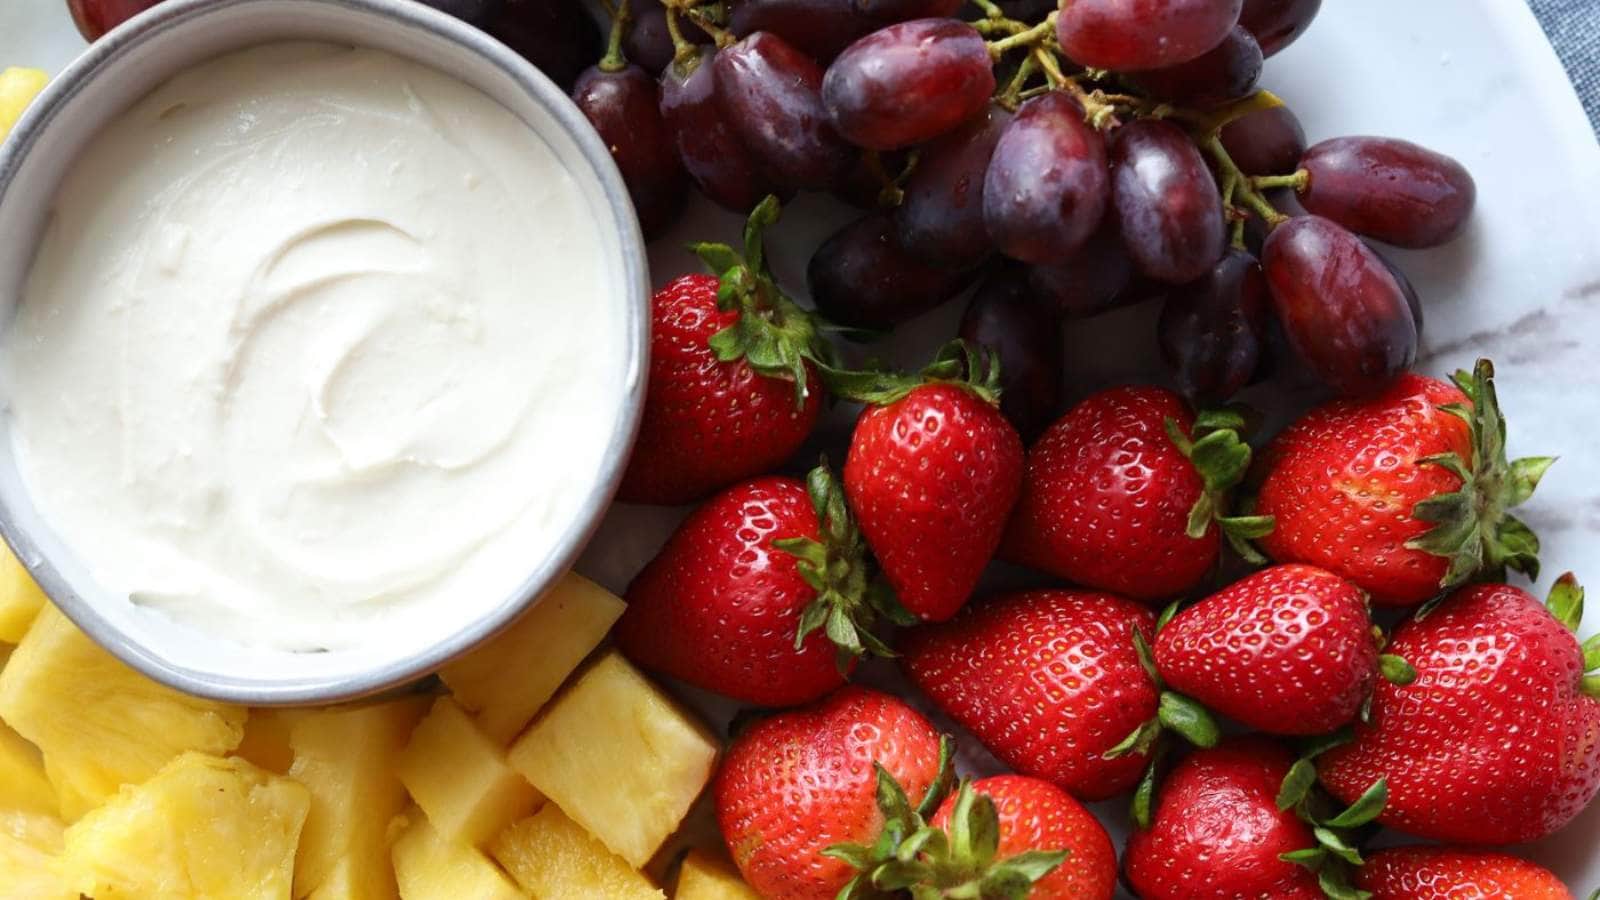 Cream Cheese Marshmalloow Fruit Dip recipe by Simply Made Eats.